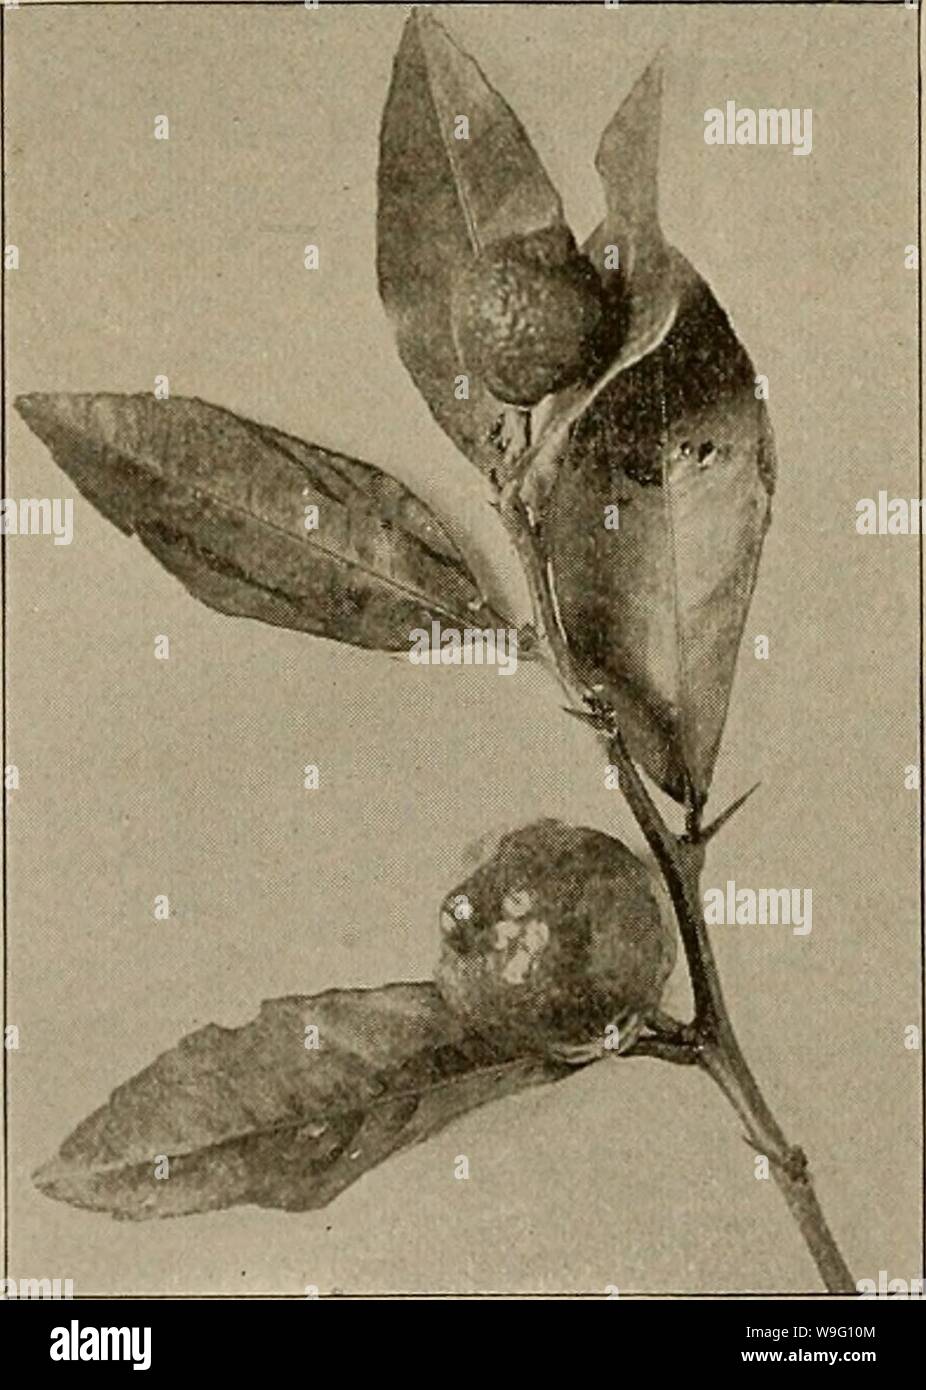 Archive image from page 89 of Culture of the citrus in. Culture of the citrus in California  cultureofcitrusi00cali Year: 1900 ( 82 STATE BOARD OF HORTICULTURE. Duncan.—A new variety recentl}' introduced into the State. Much larger than an orange and smaller than a shaddock; a delicious fruit, by many preferred to an orange. Skin smooth, pale yellow, sulsacid. The membrane dividing the pulp is bitter and must be Removed before eating the pulp. Thursby. March Seedless. Leondardy. THE OTAHEITE ORANGE. Citrus aurantium, var. Pumiluvi, Gallesio. This dwarf species of the citrus is largely grown in Stock Photo